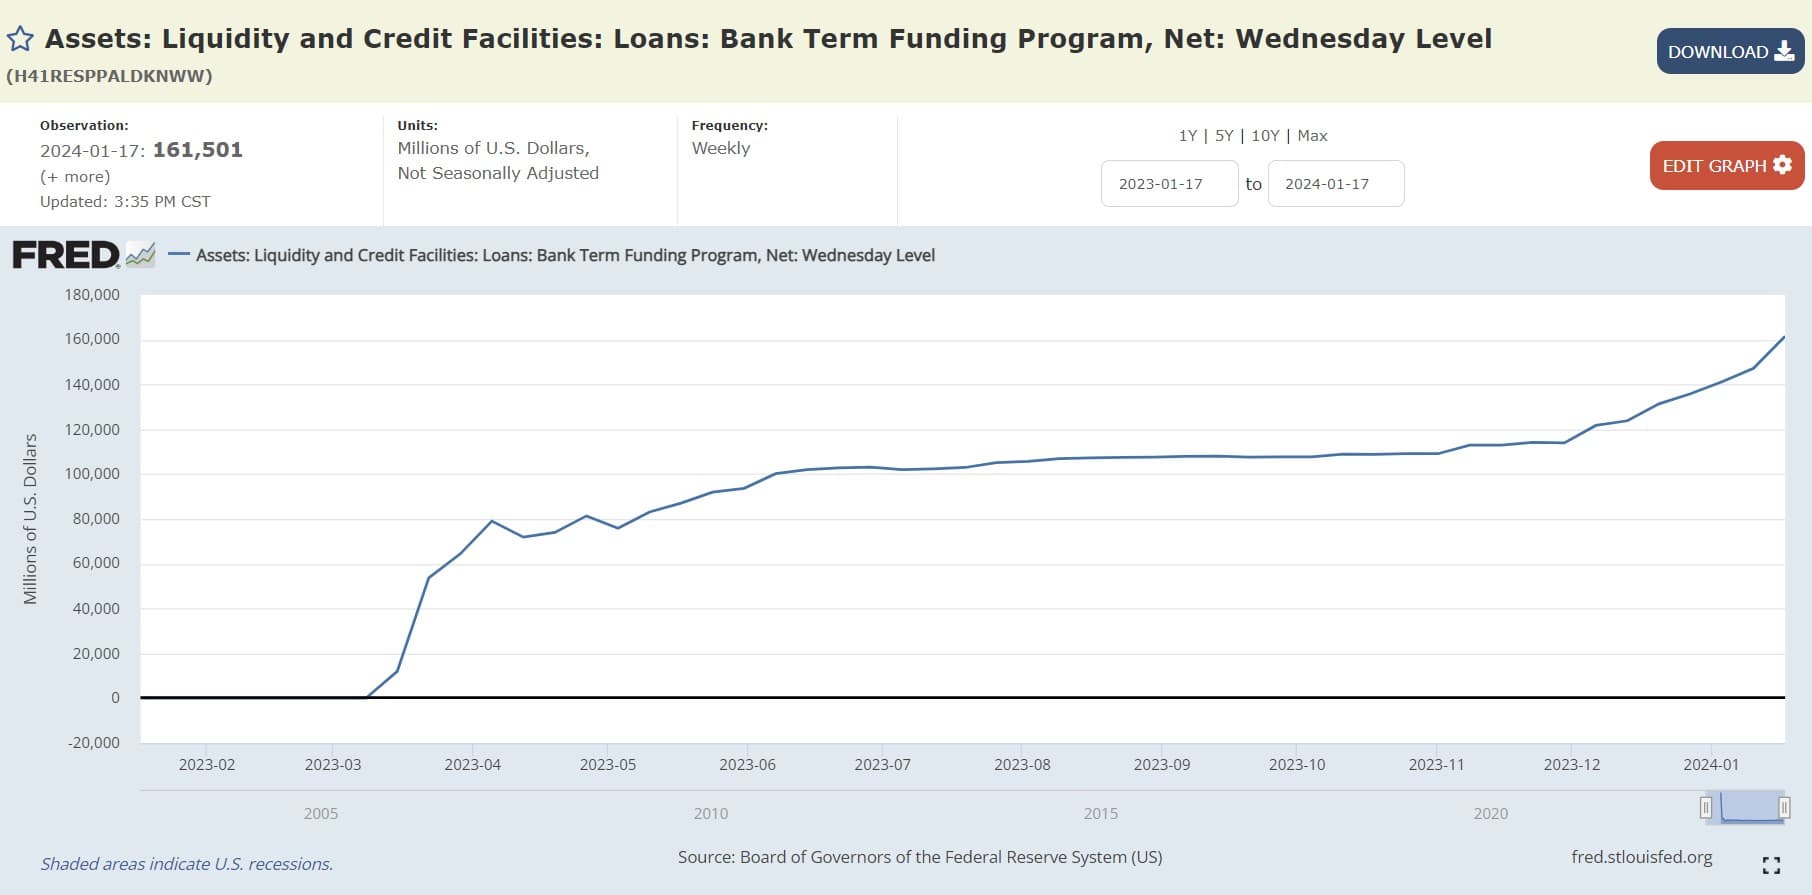 Assets: Liquidity and Credit Facilities: Loans: Bank Term Funding Program, Net: Wednesday Level